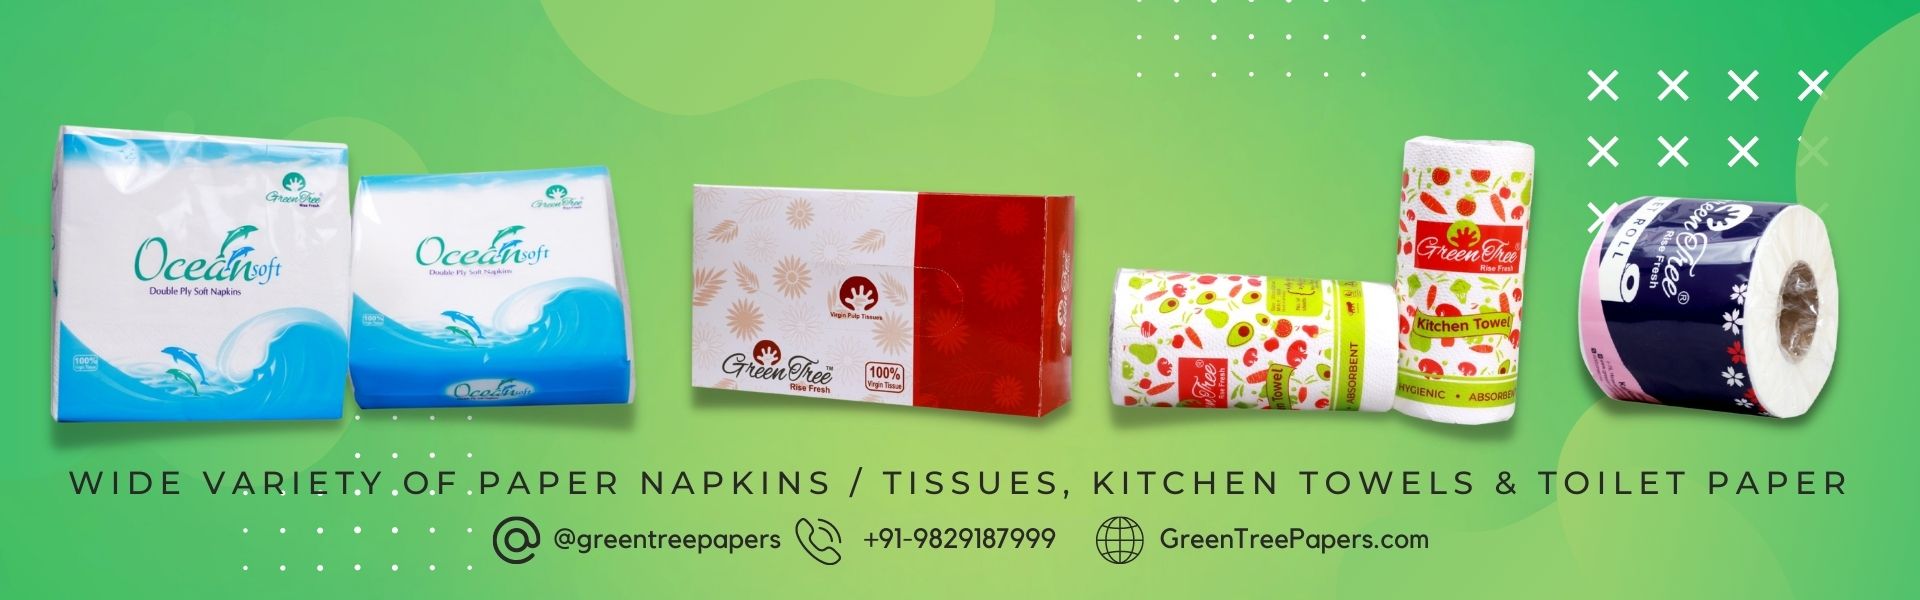 Kitchen Towel and Toilet paper Manufacturers in India